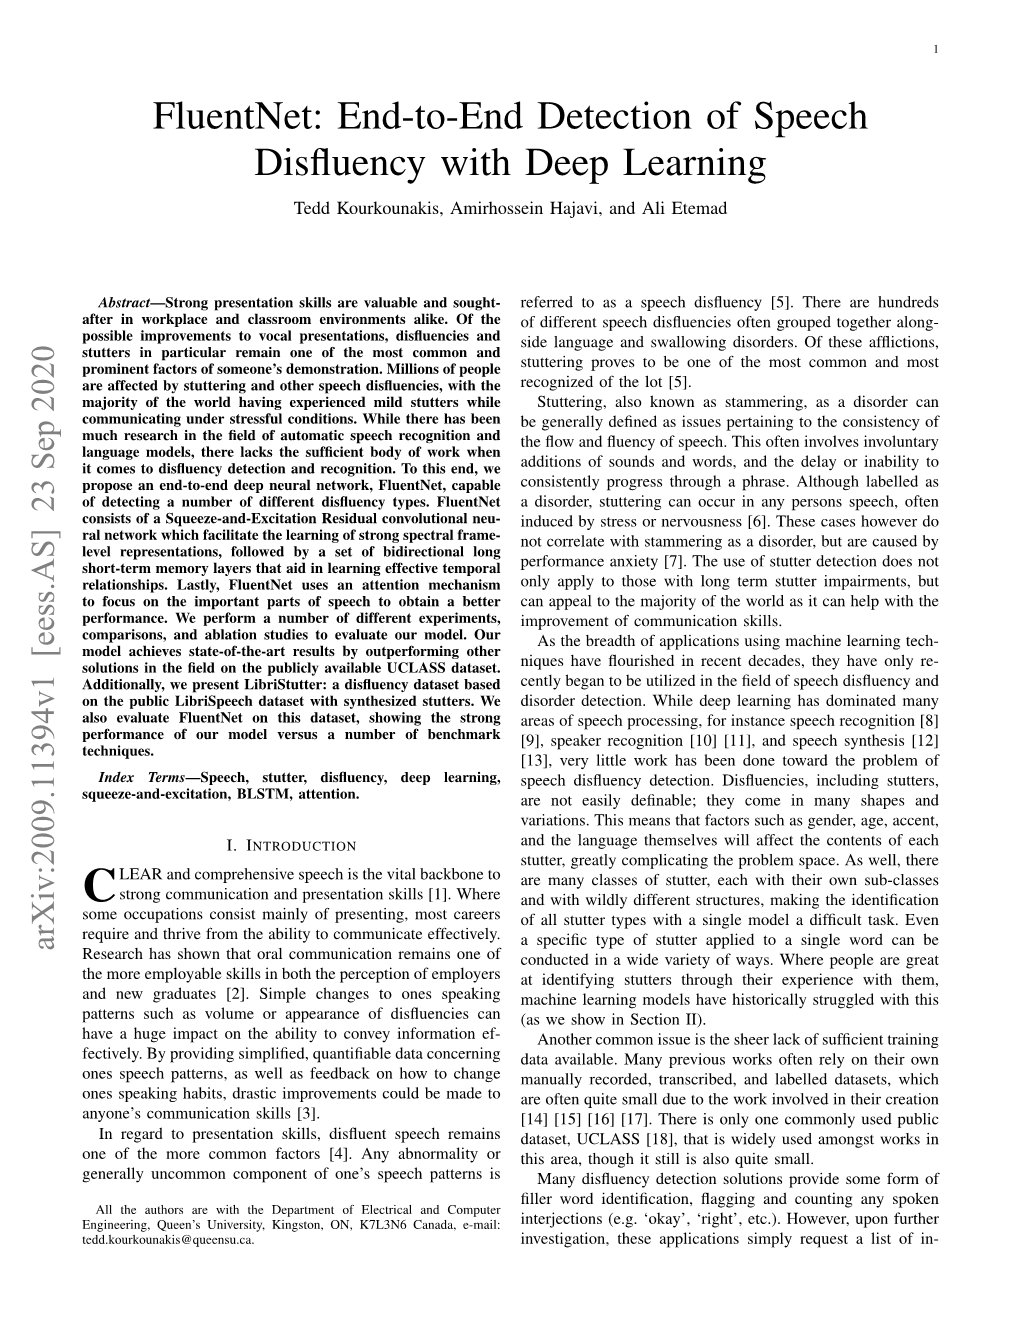 End-To-End Detection of Speech Disfluency with Deep Learning